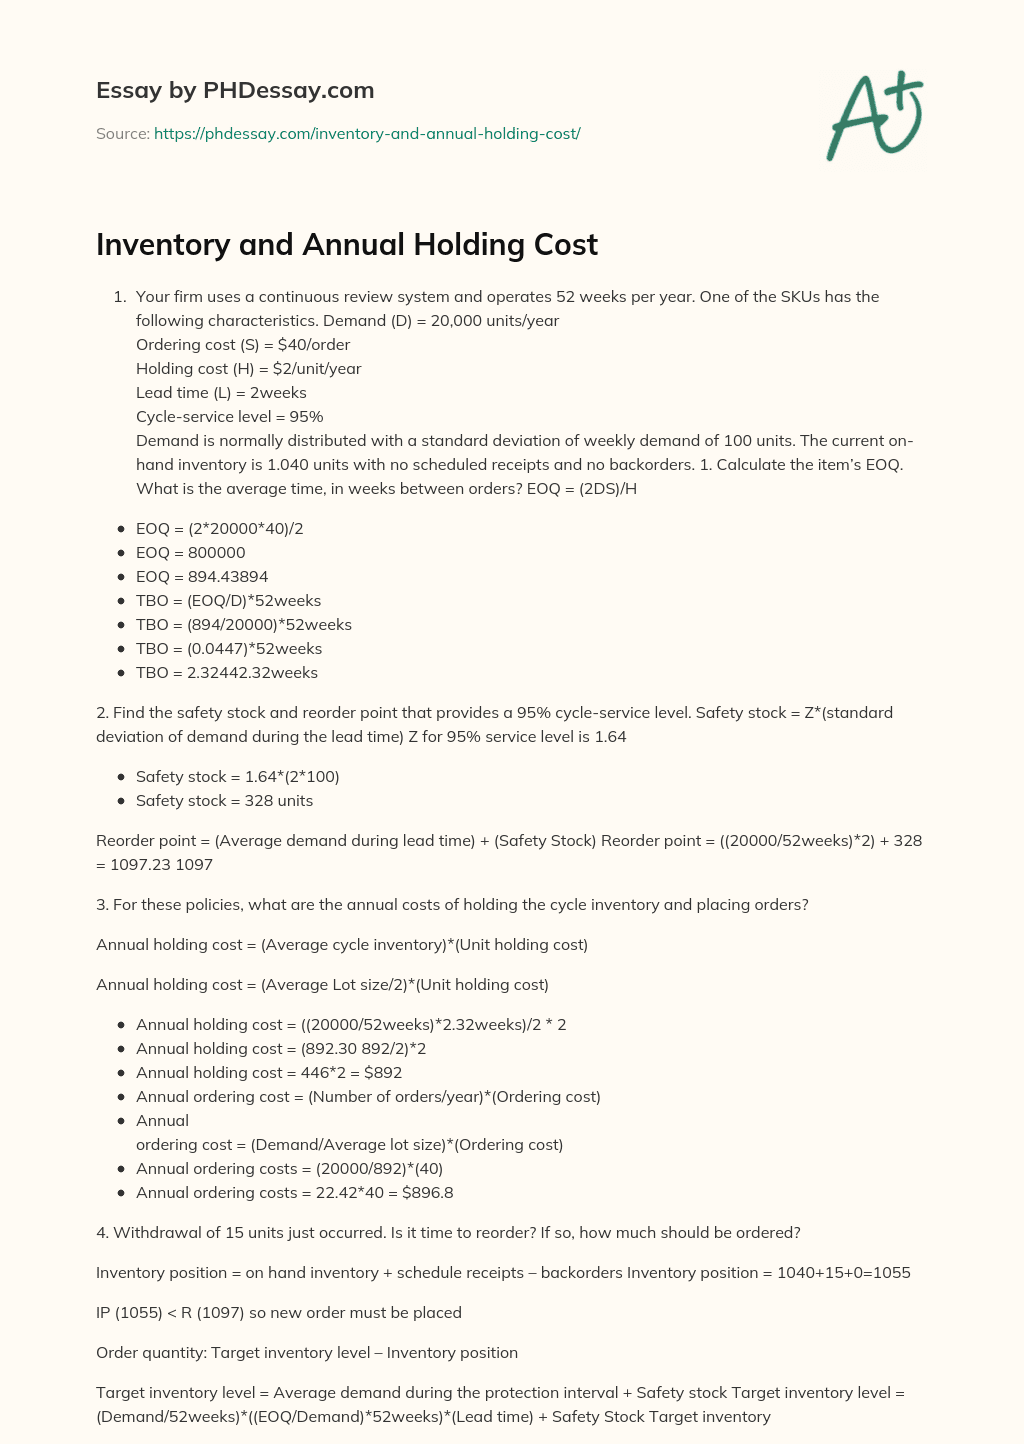 Inventory and Annual Holding Cost essay